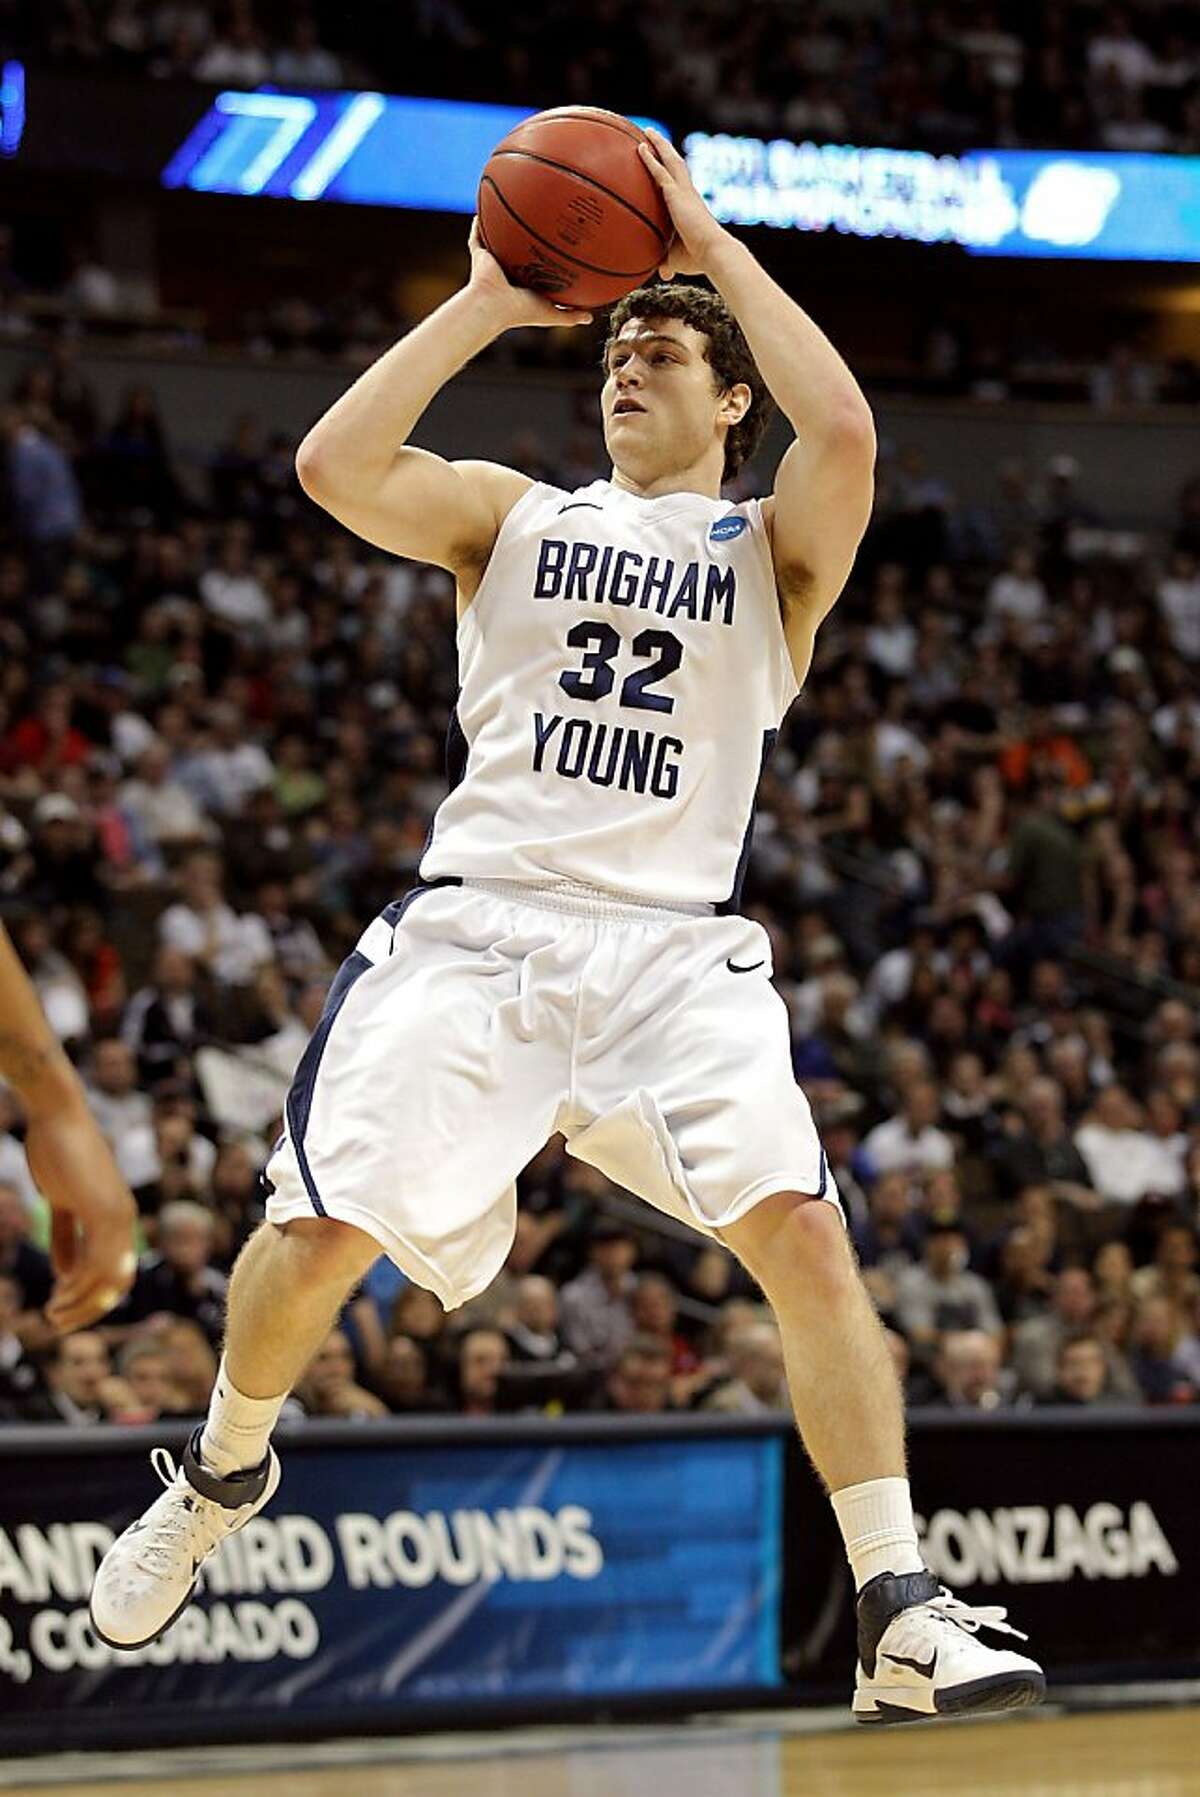 Jimmer Fredette #32 of the Brigham Young Cougars shoot against the Gonzaga Bulldogs during the third round of the 2011 NCAA men's basketball tournament at Pepsi Center on March 19, 2011 in Denver, Colorado.